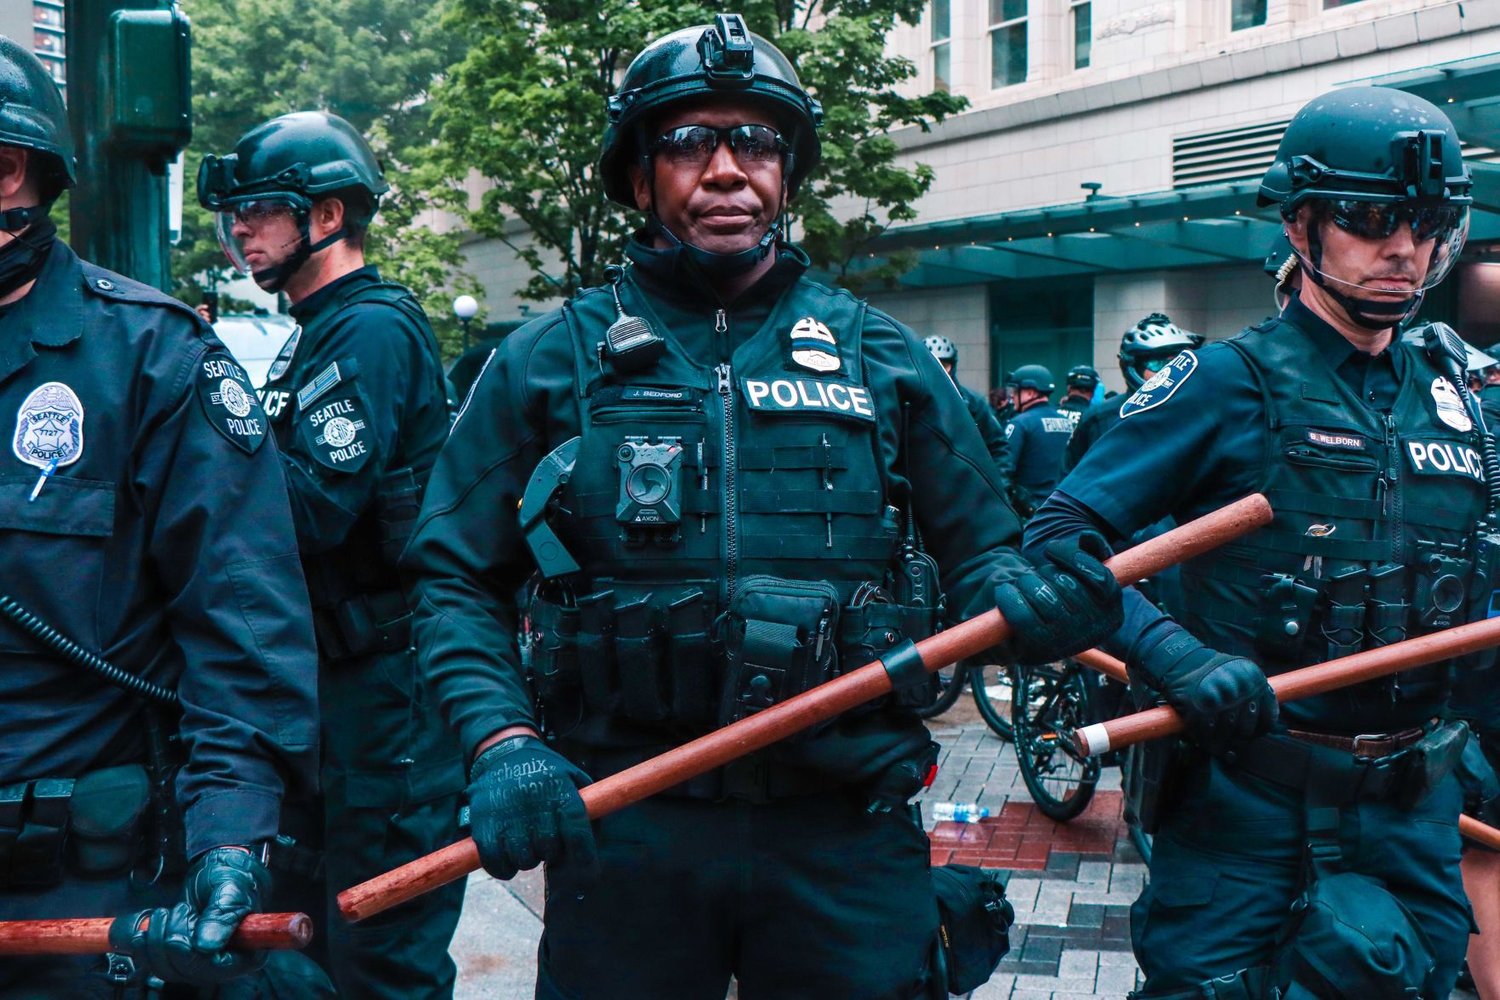 Seattle Police Department officers stand guard during protests in late May 2020.